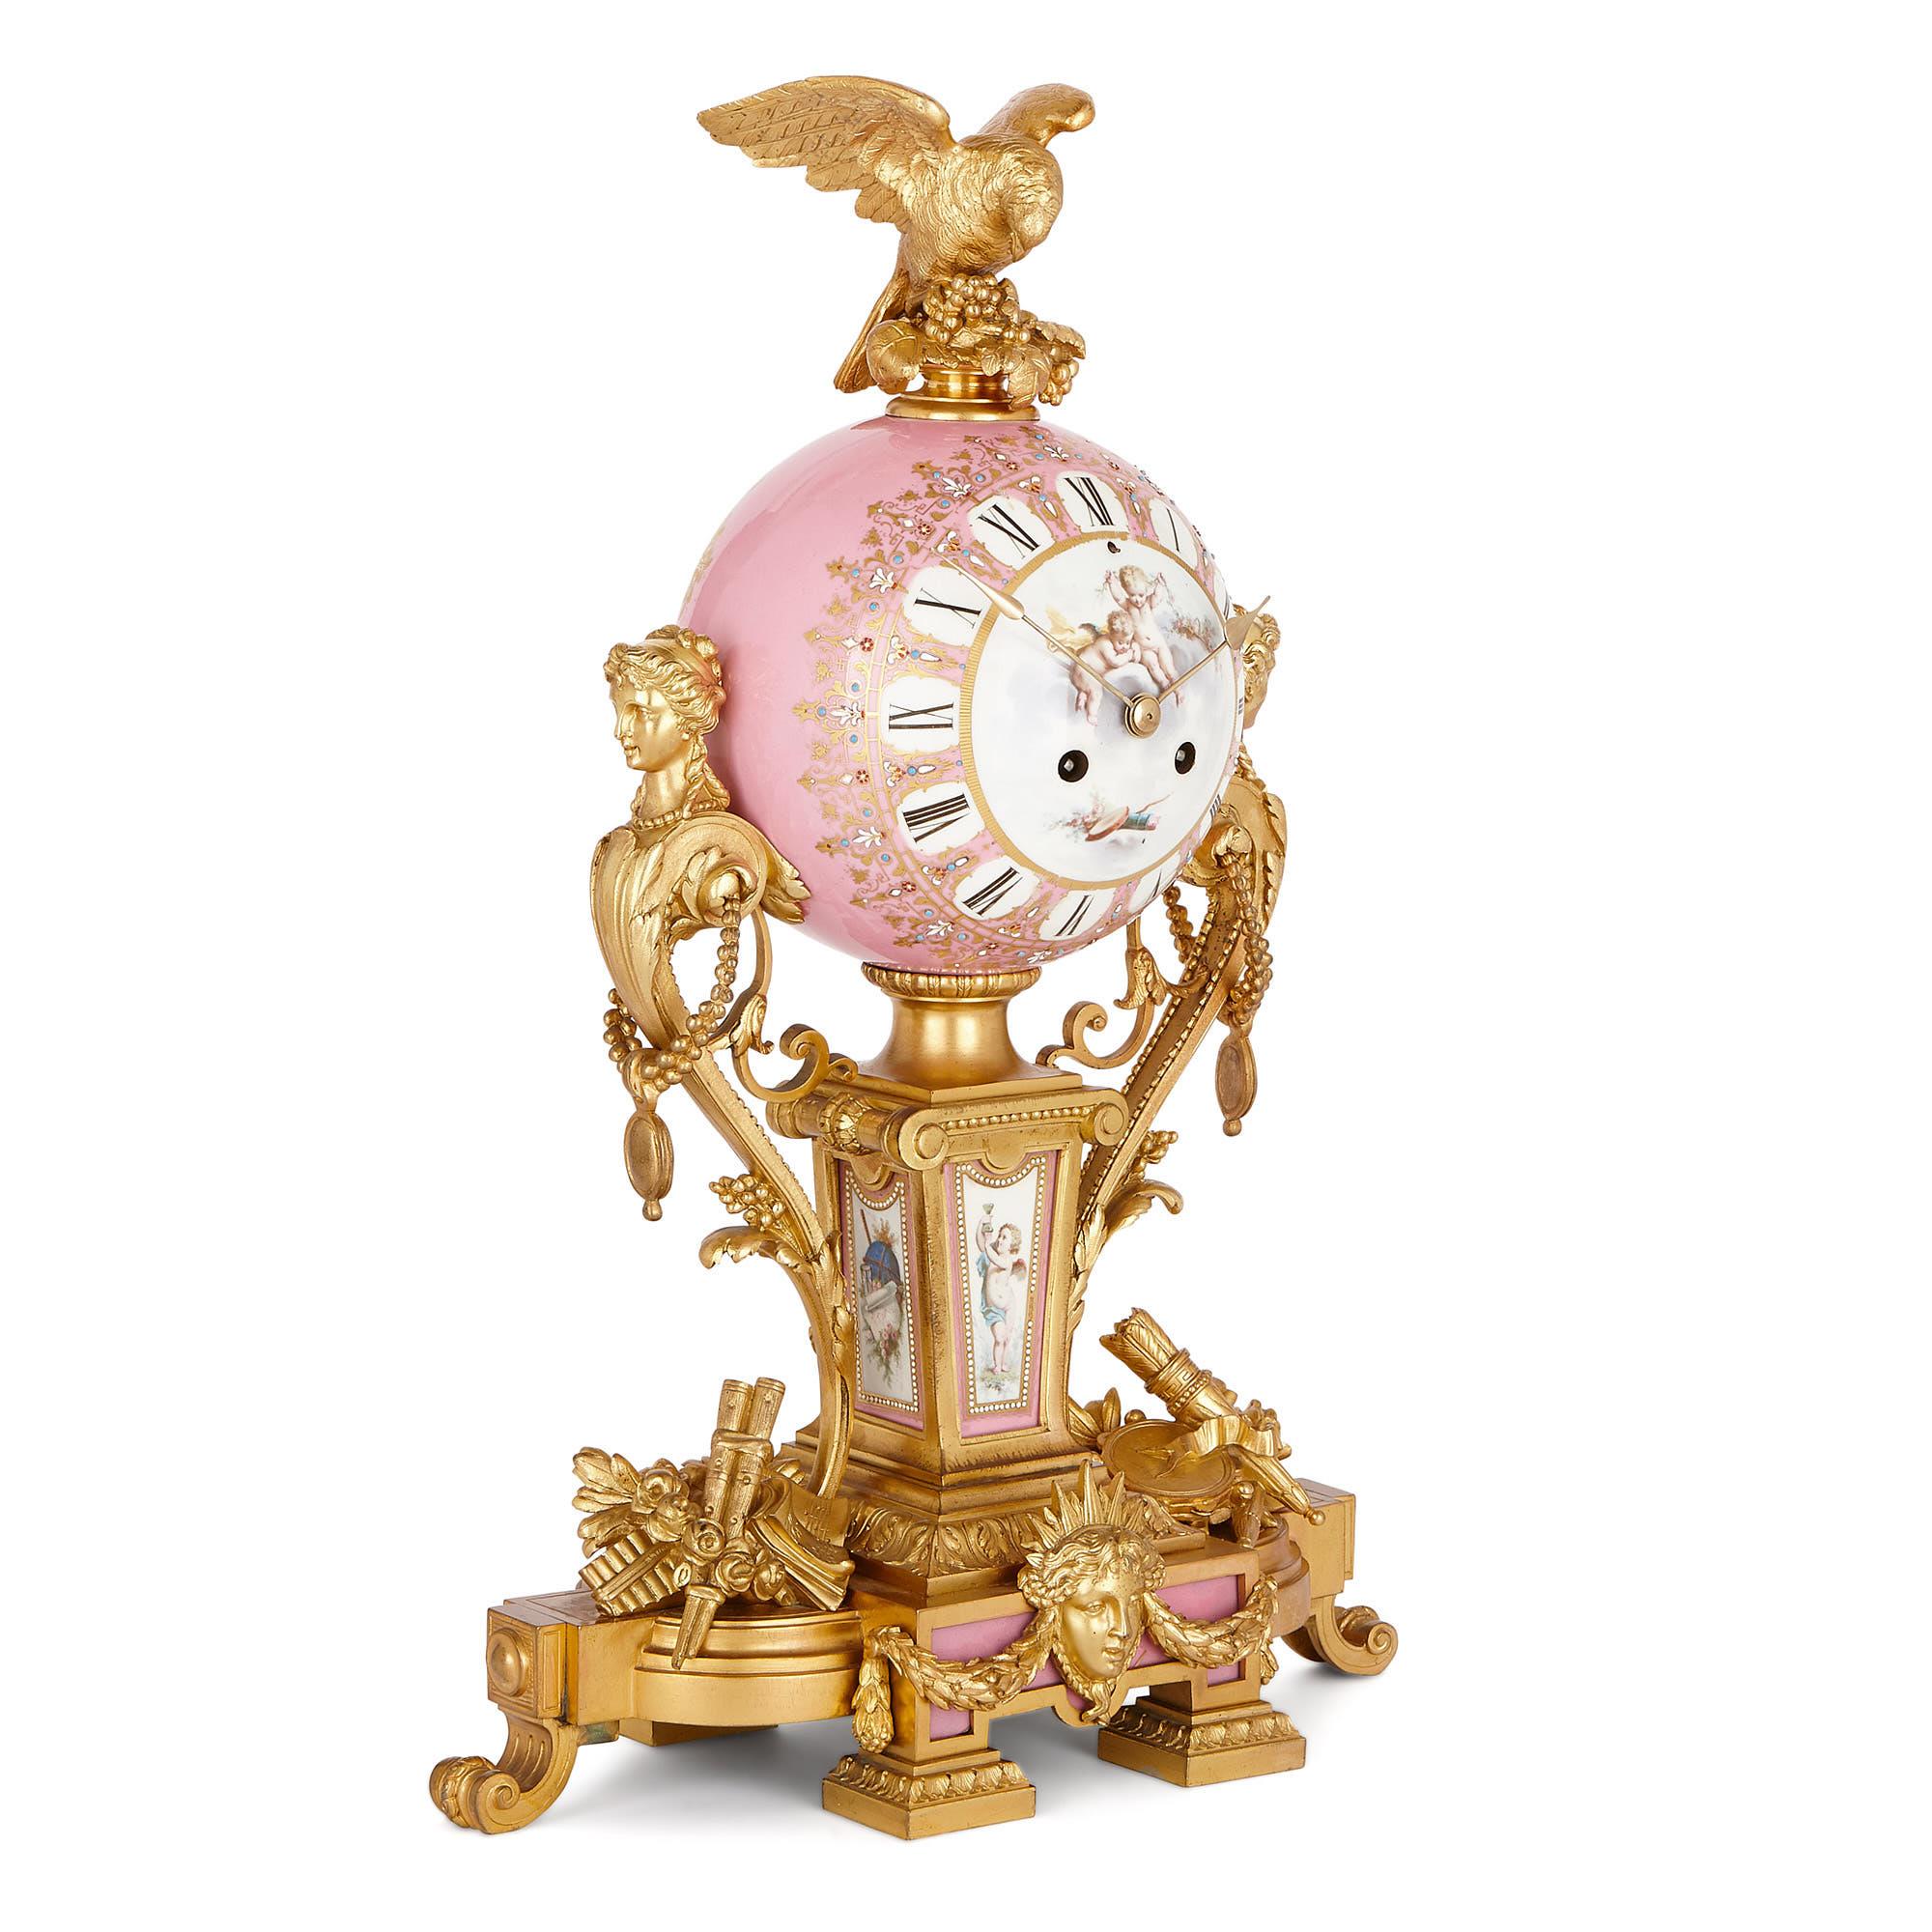 This wonderful, Sèvres style mantel clock was crafted in the late 19th century by the famous Parisian clock-making firm, Le Roy et fils. The company was founded in 1785 by Basile Charles Le Roy, who later passed it on to his son, Charles-Louis Le